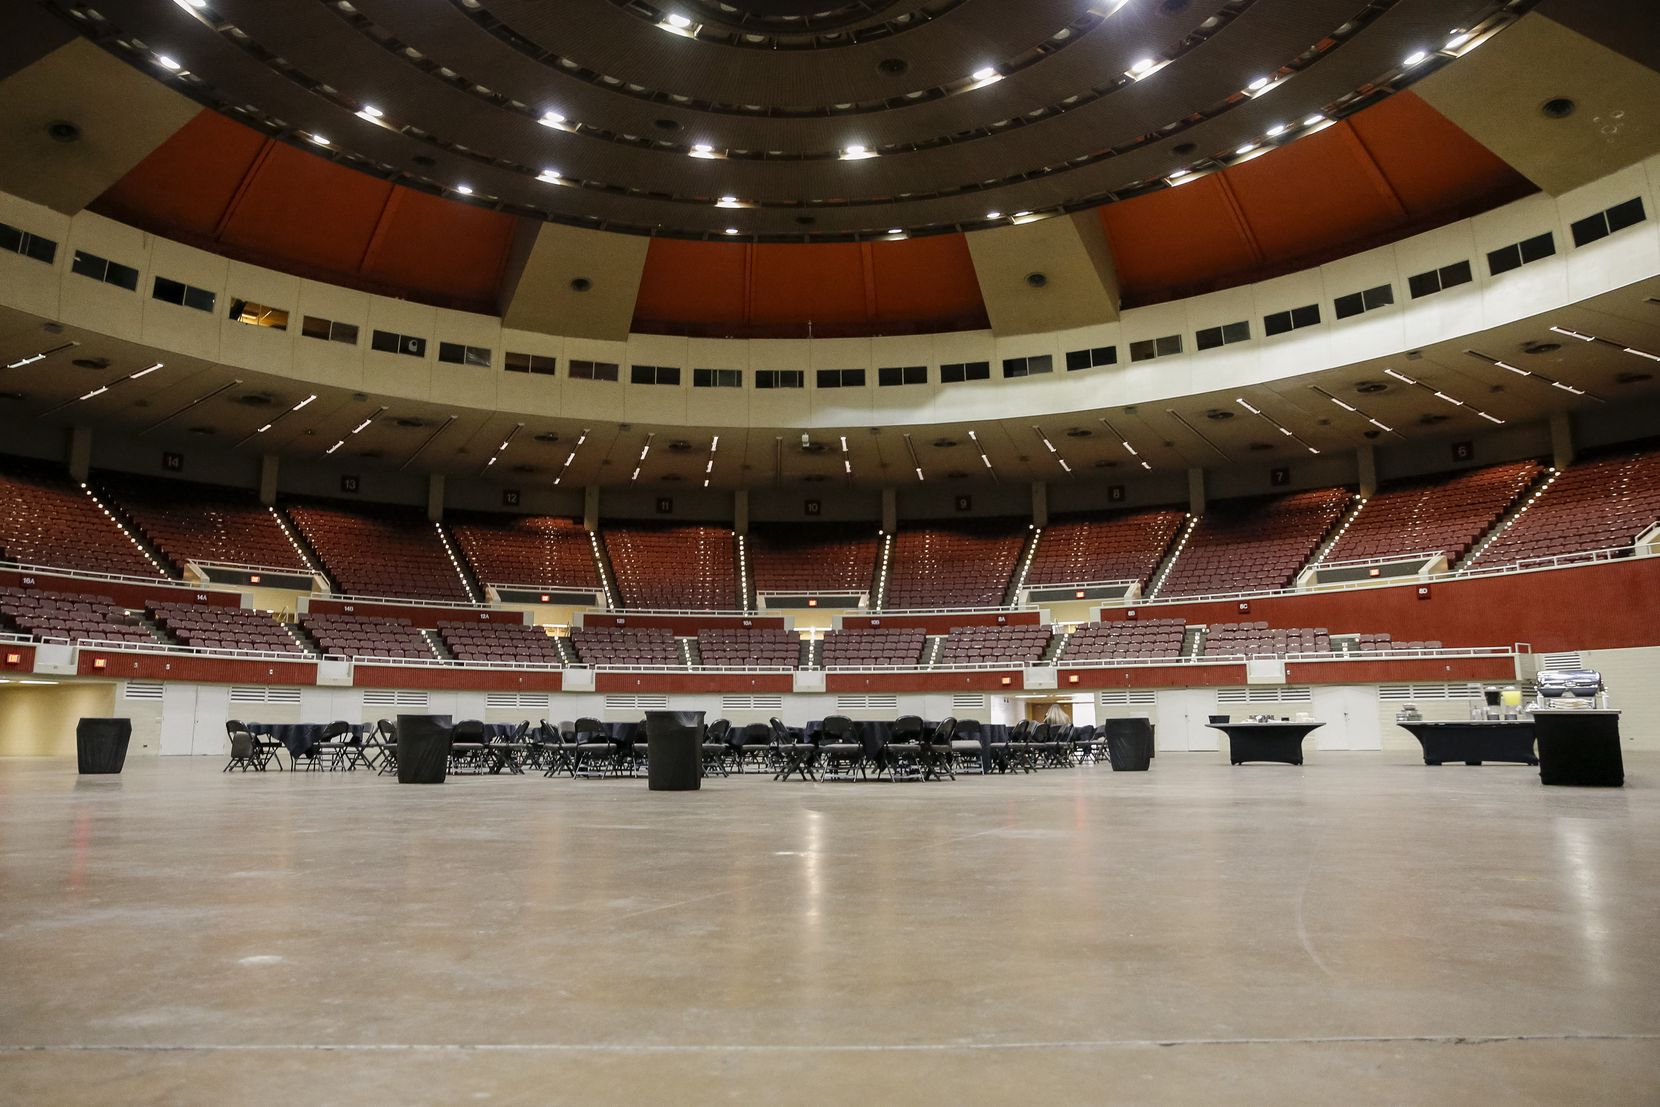 The convention center arena, along with the building that now houses the Black Academy of Arts and Letters, are the oldest portions of the Kay Bailey Hutchison complex, dating back to 1957.